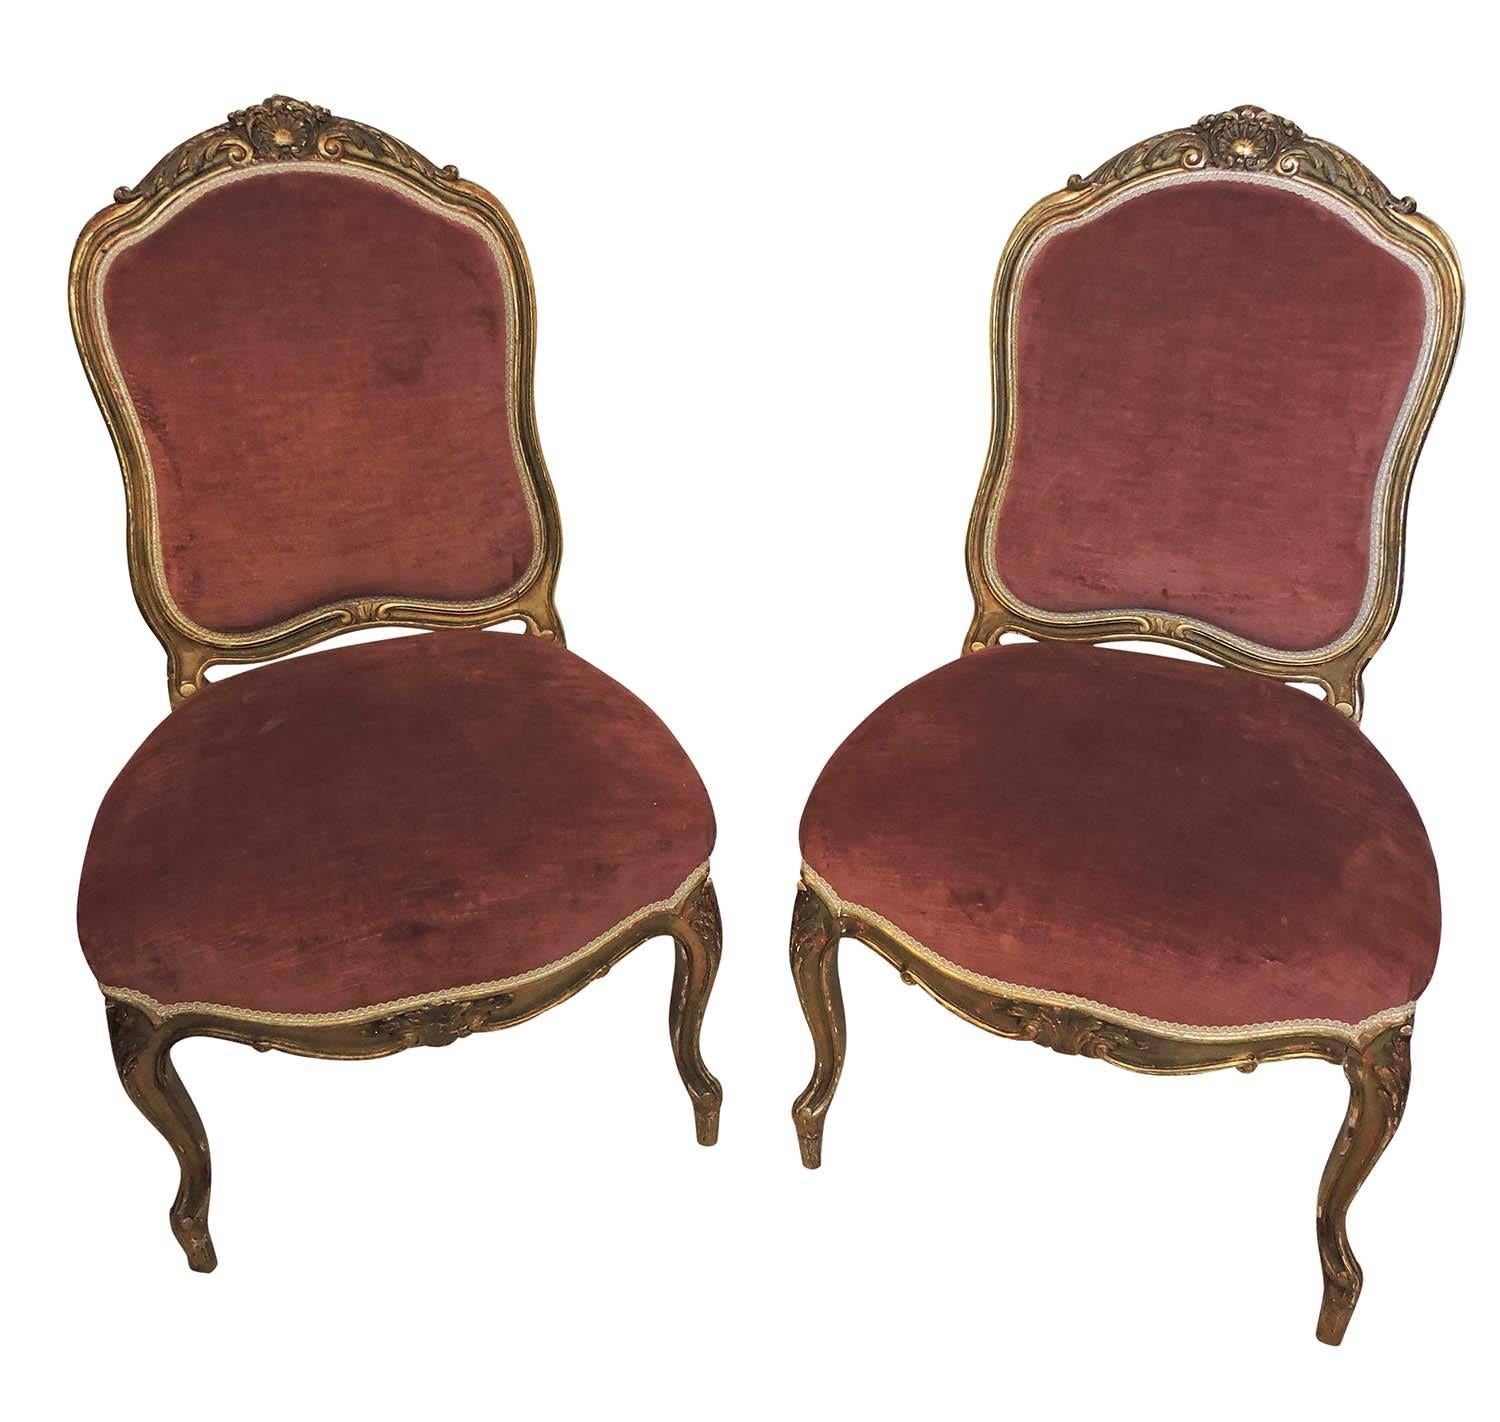 Pair of Giltwood and Rose Velvet 19th Century Louis XV Style Chairs